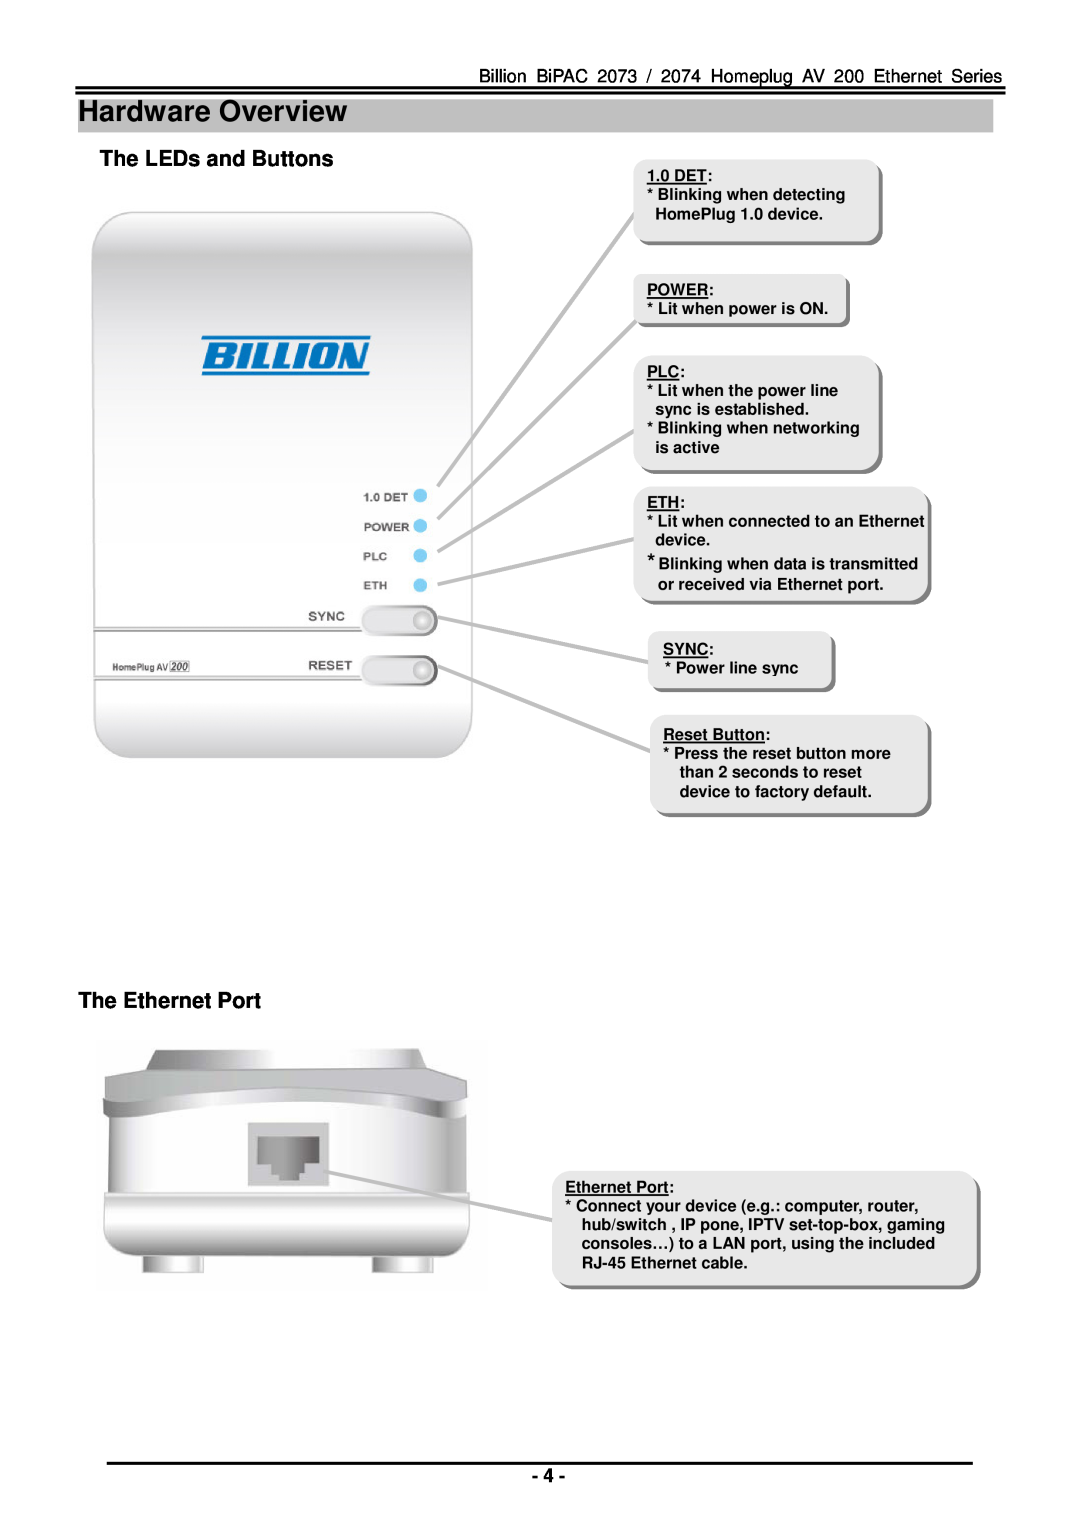 Billion Electric Company BiPAC 2073 quick start Hardware Overview, The LEDs and Buttons, The Ethernet Port 